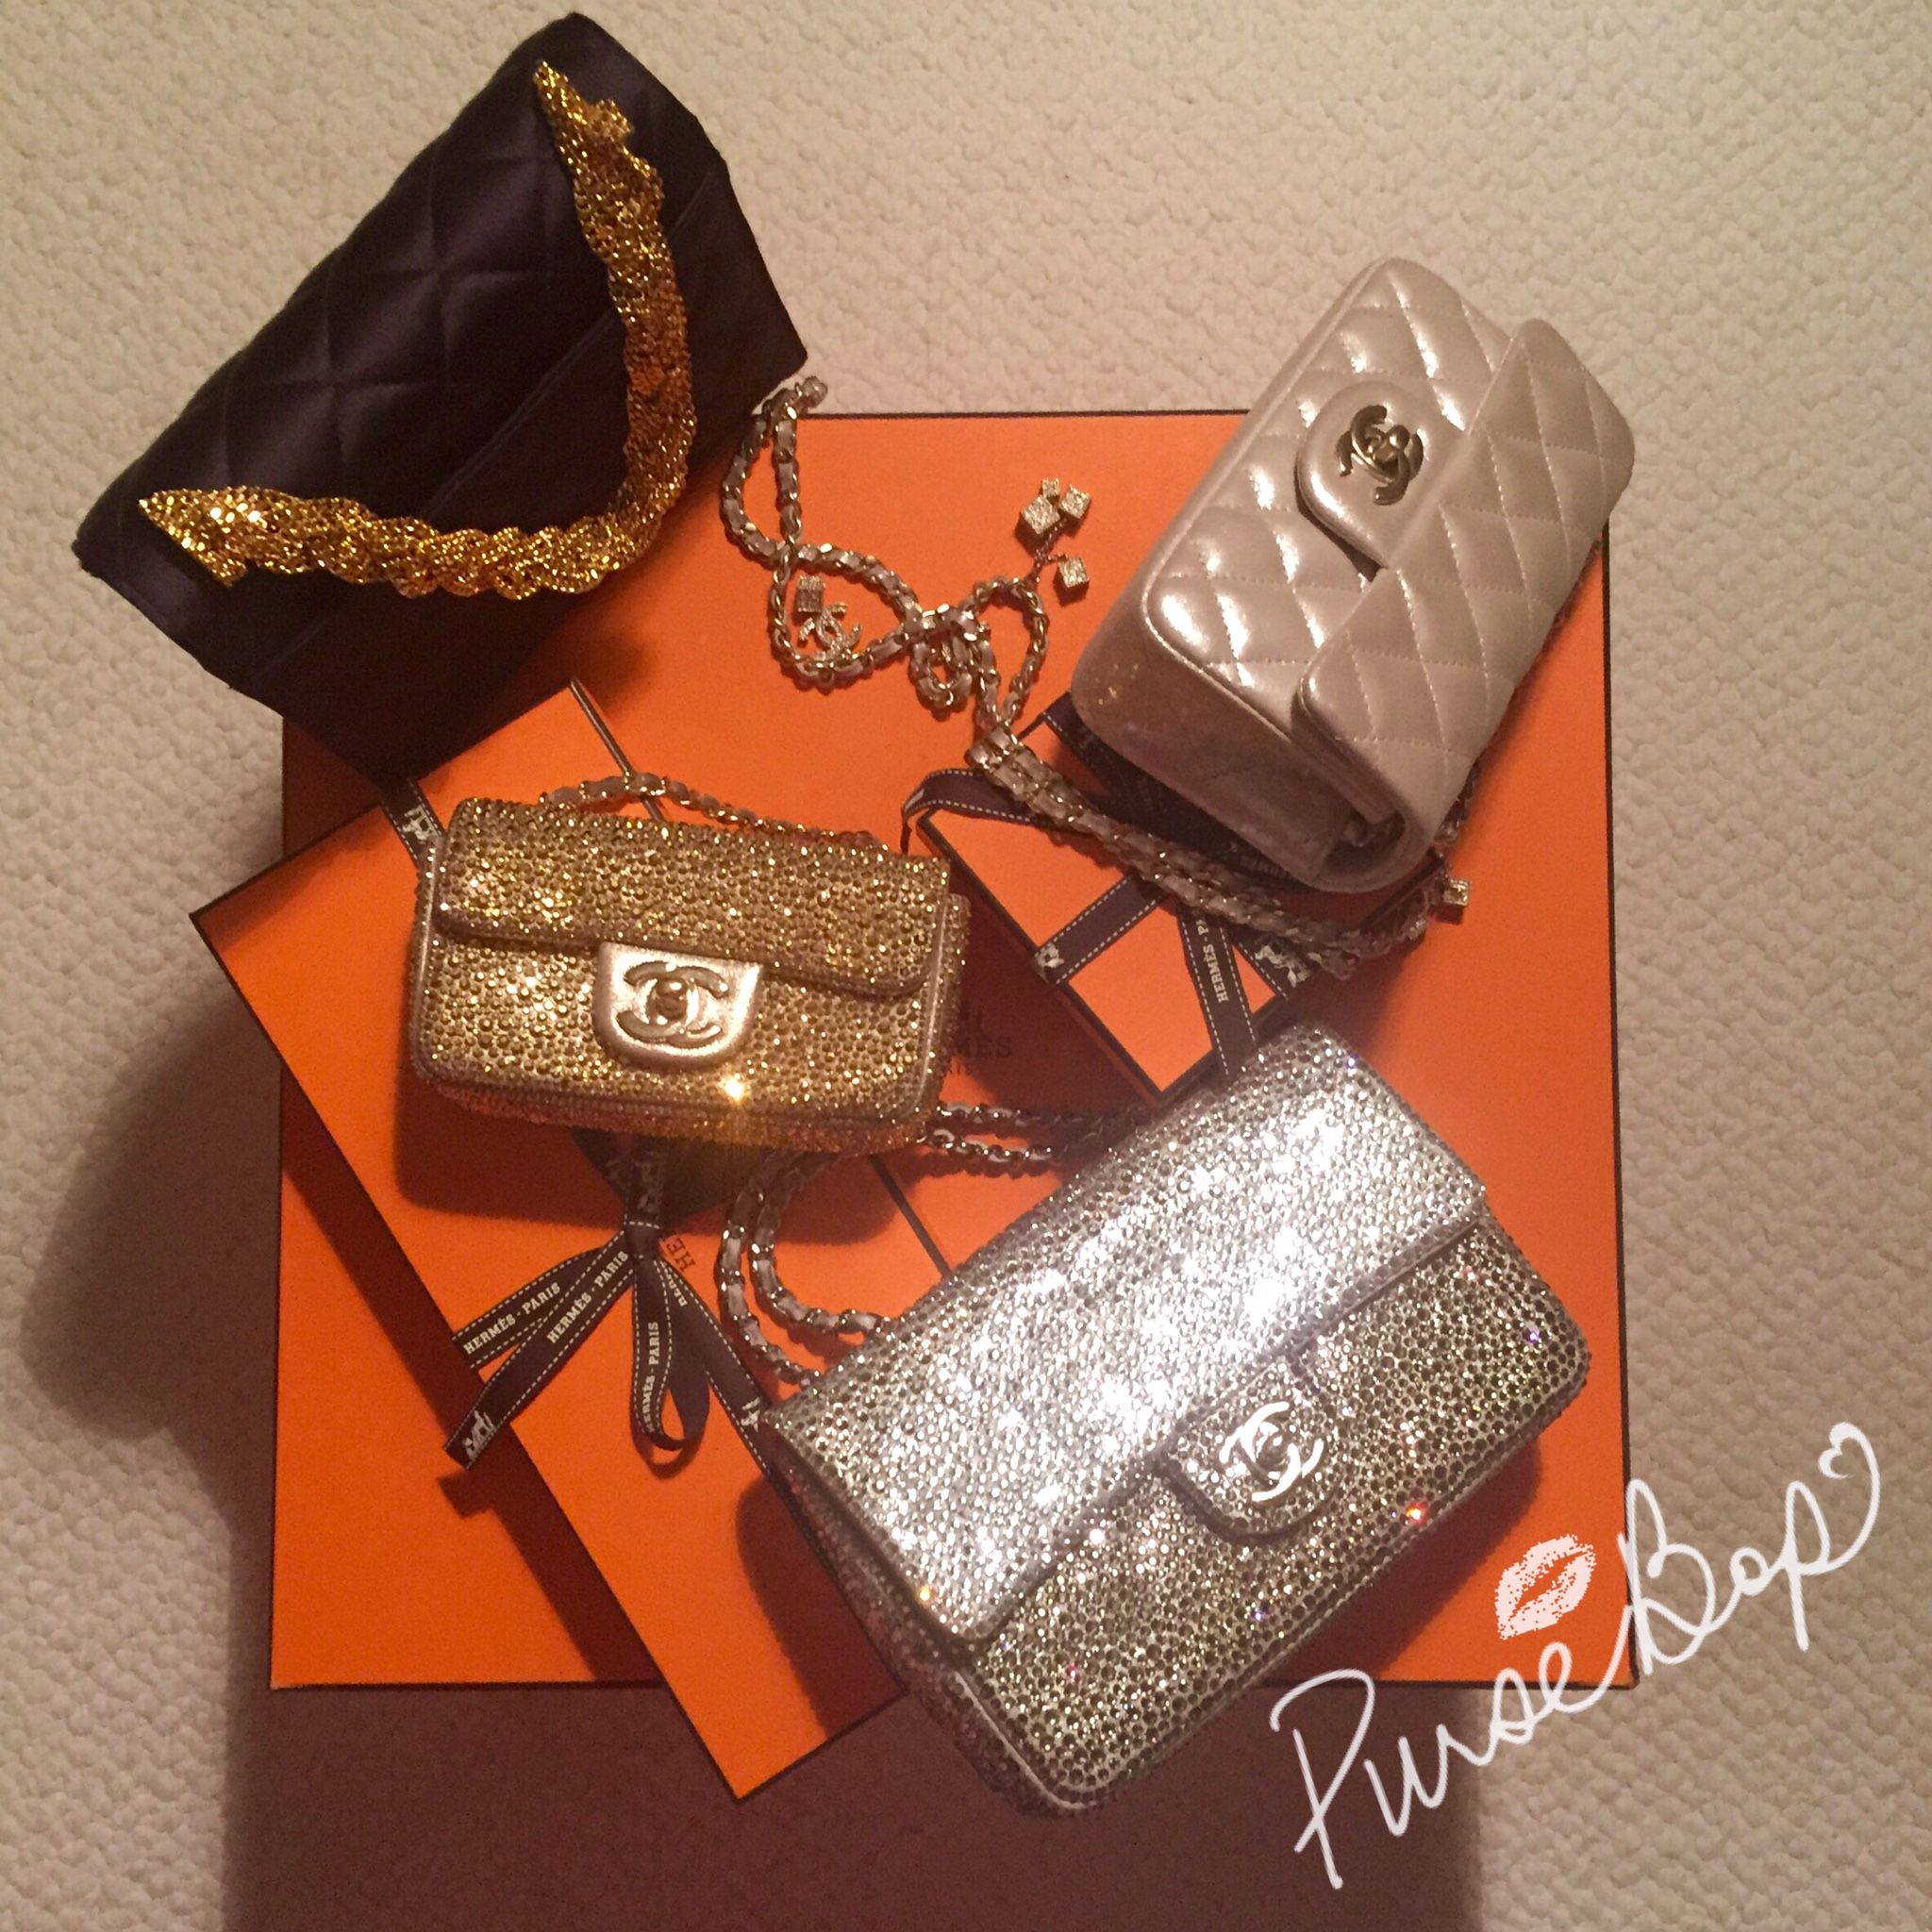 Is your handbag collection looking tired? Follow PurseBop's five